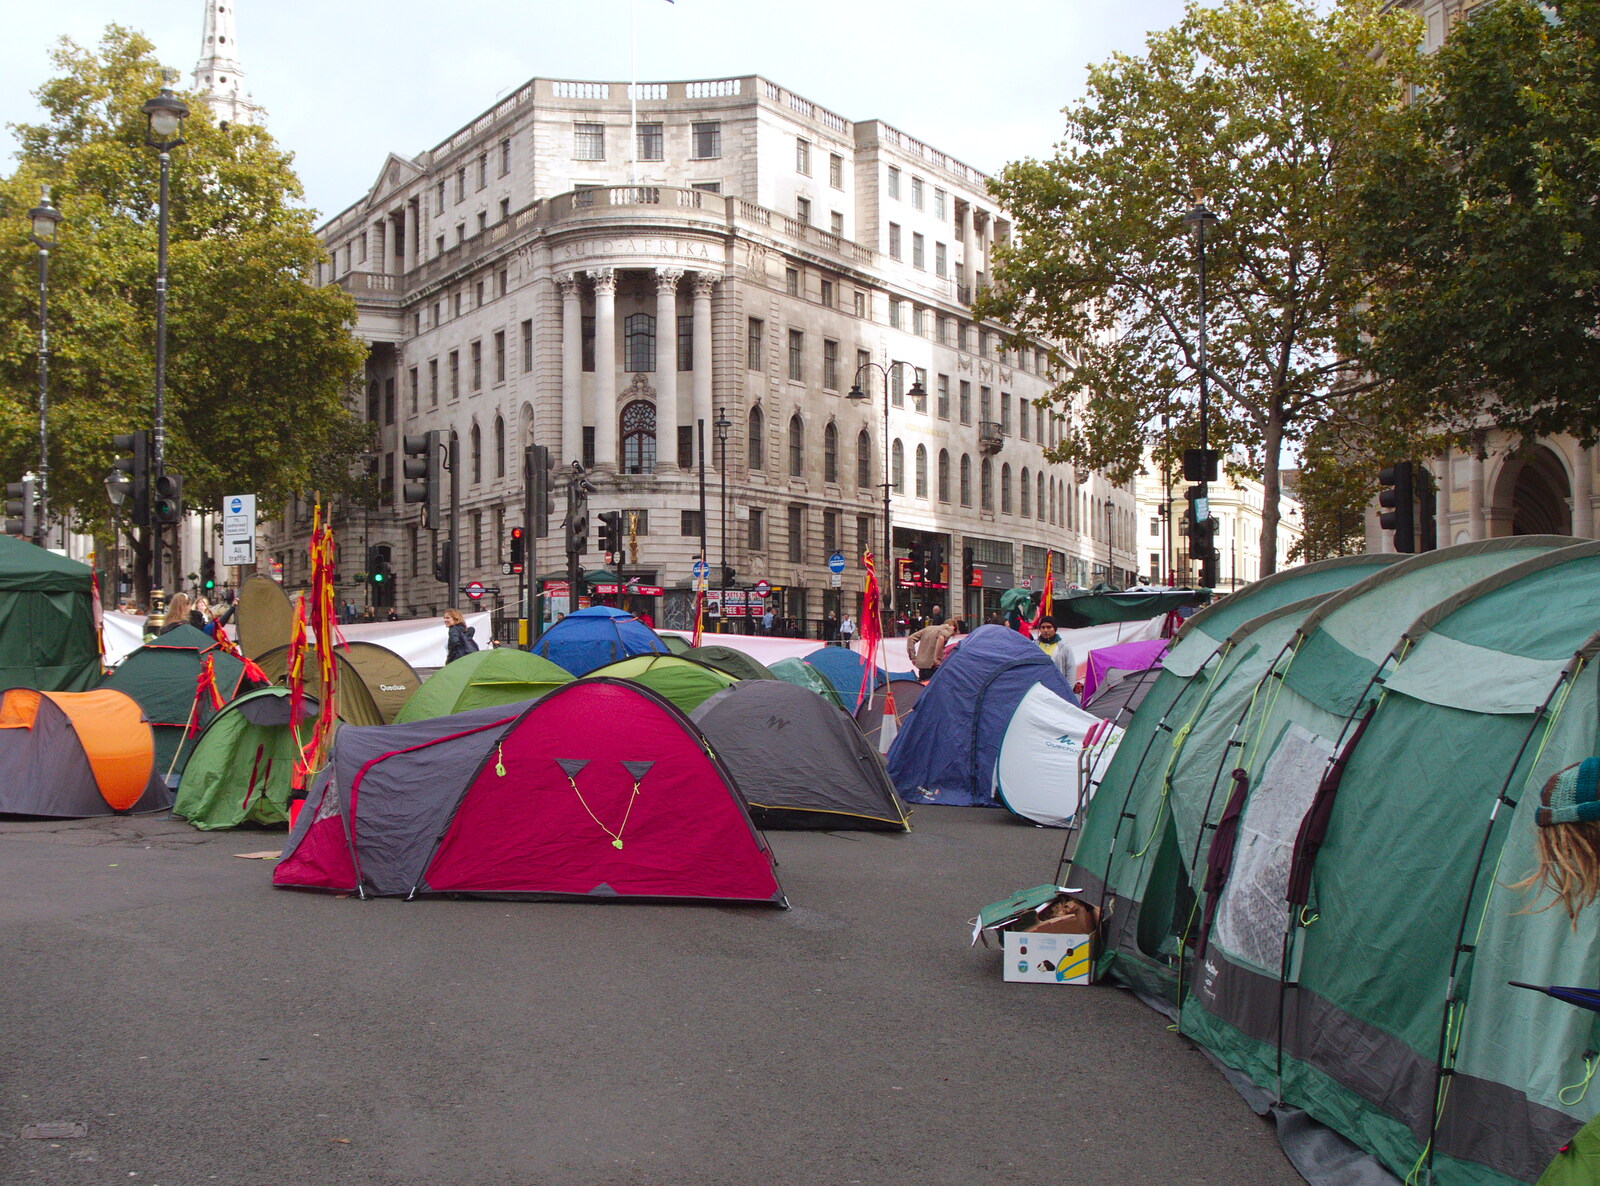 More tent city from The Extinction Rebellion Protest, Westminster, London - 9th October 2019